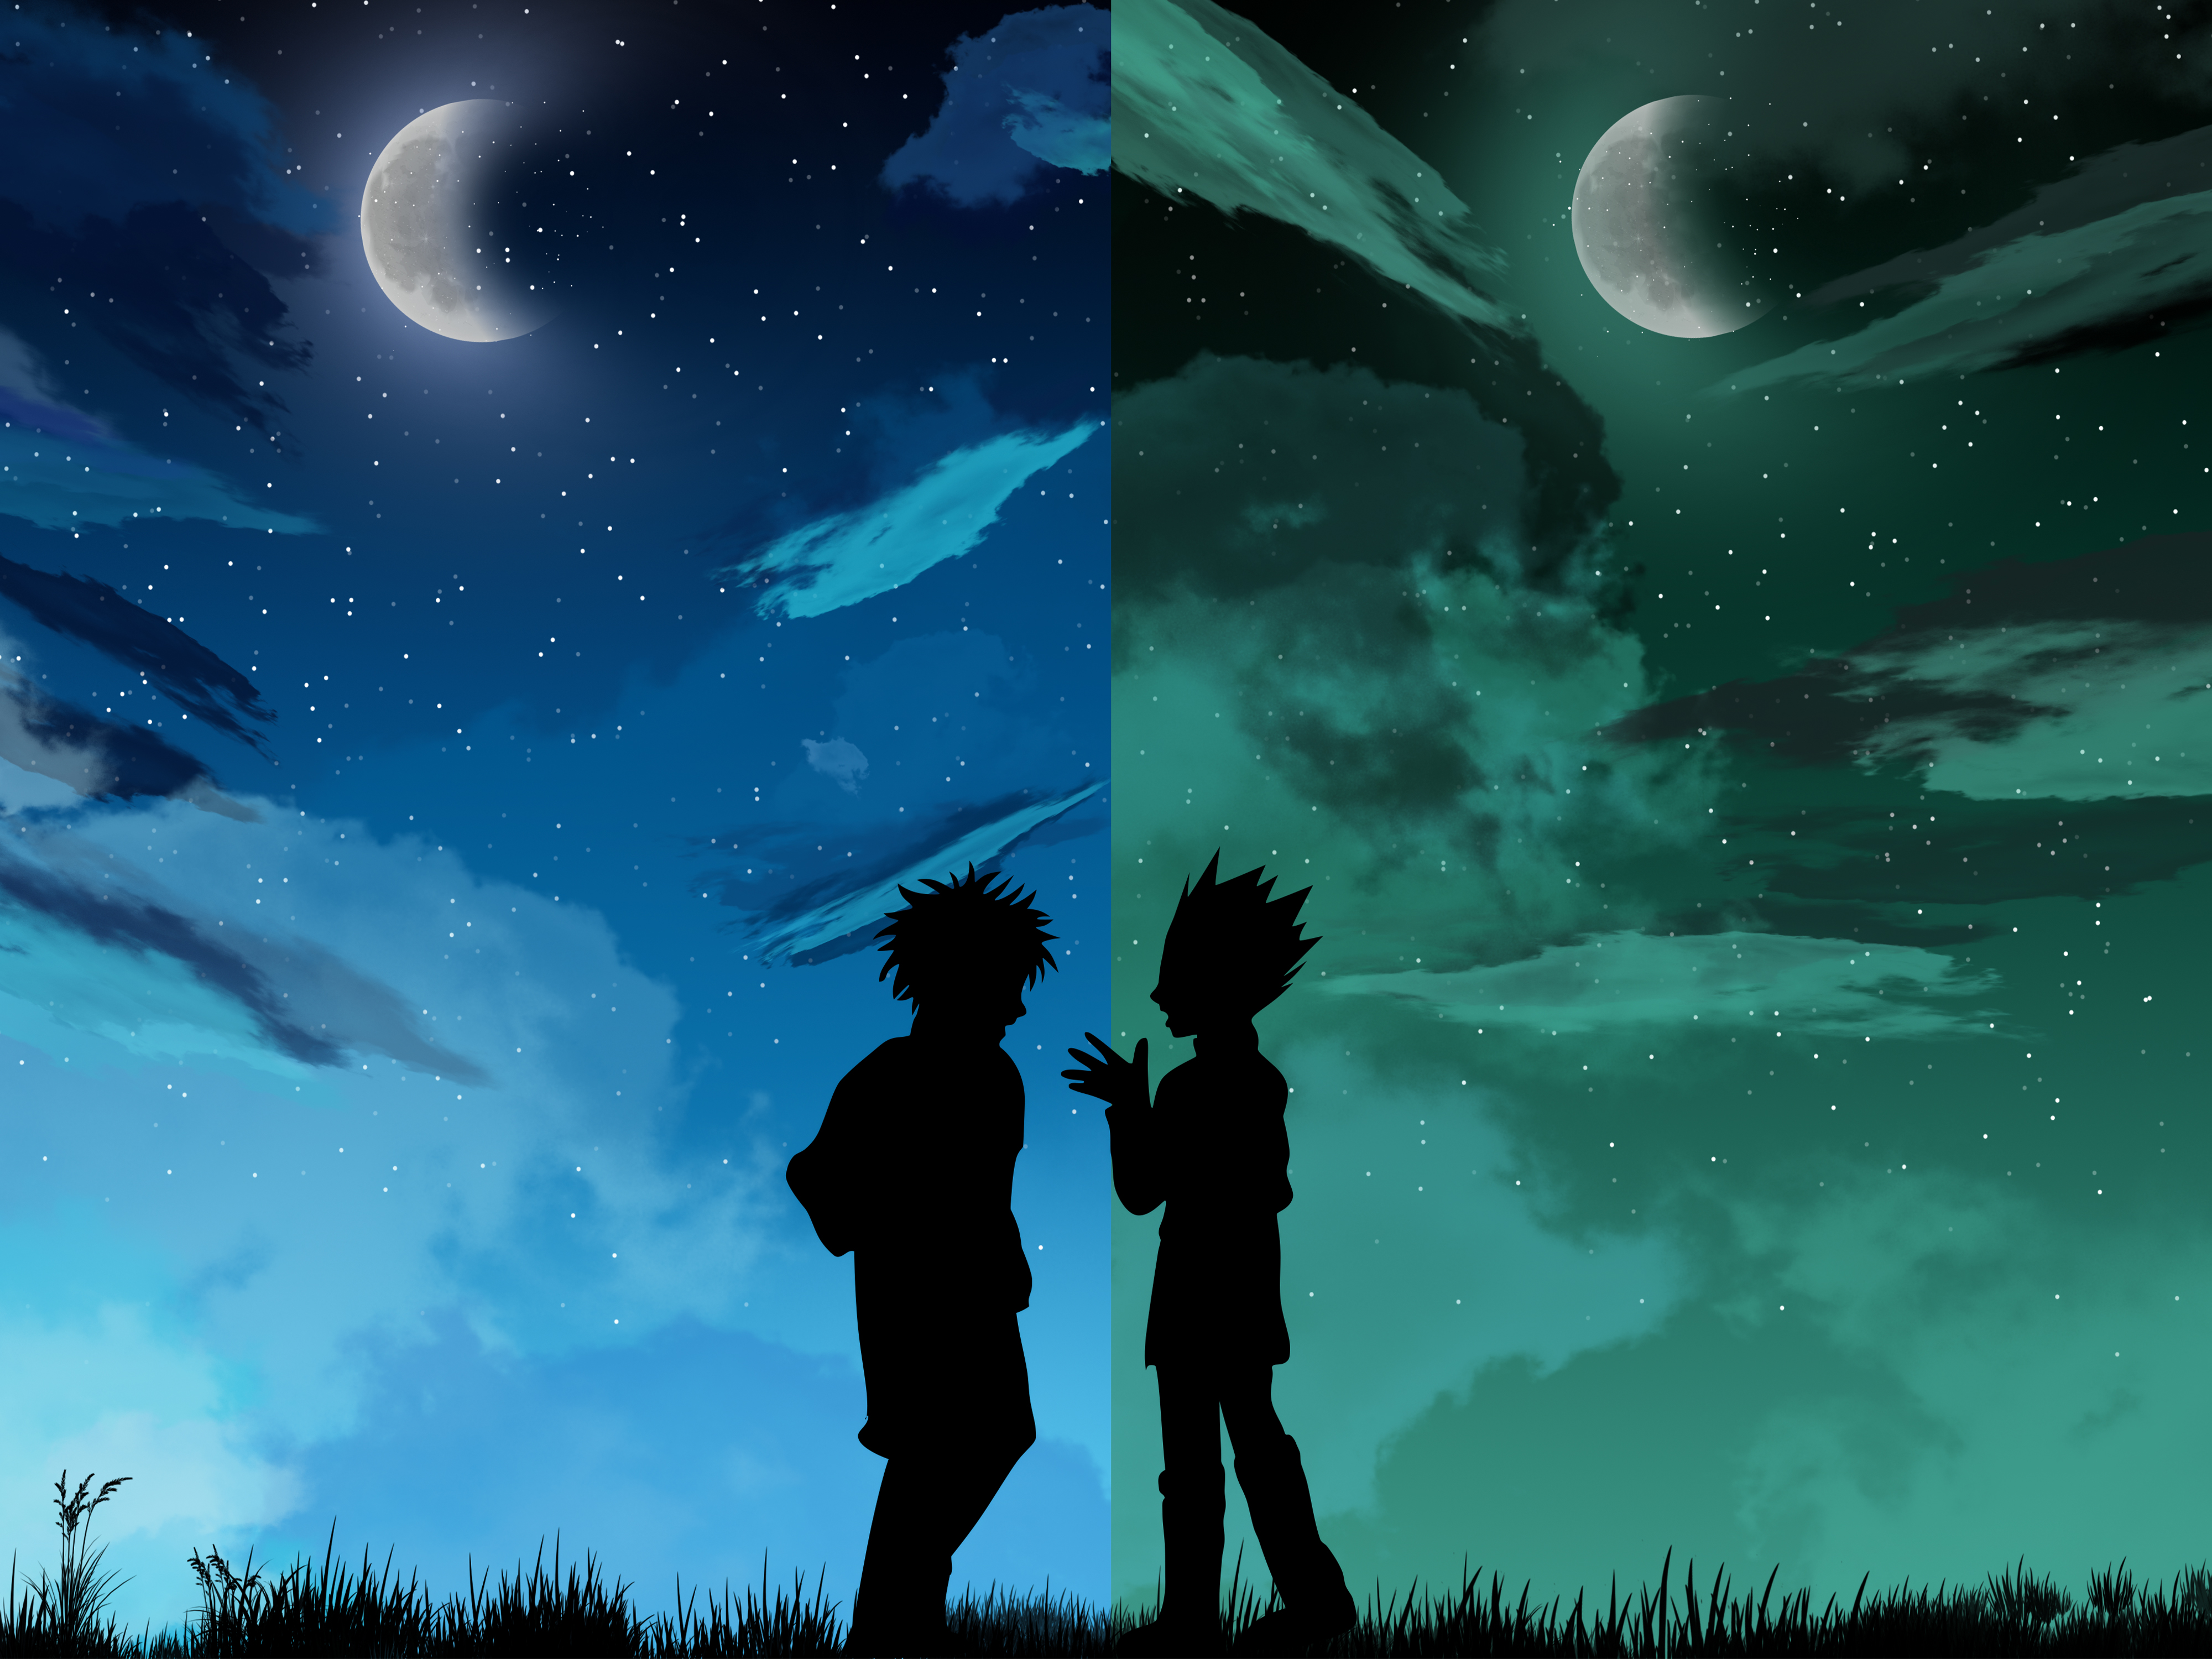 Killua Zoldyck with Gon Freecss From Hunter x Hunter (Redraw) by @abinfty  by Ab KHALED